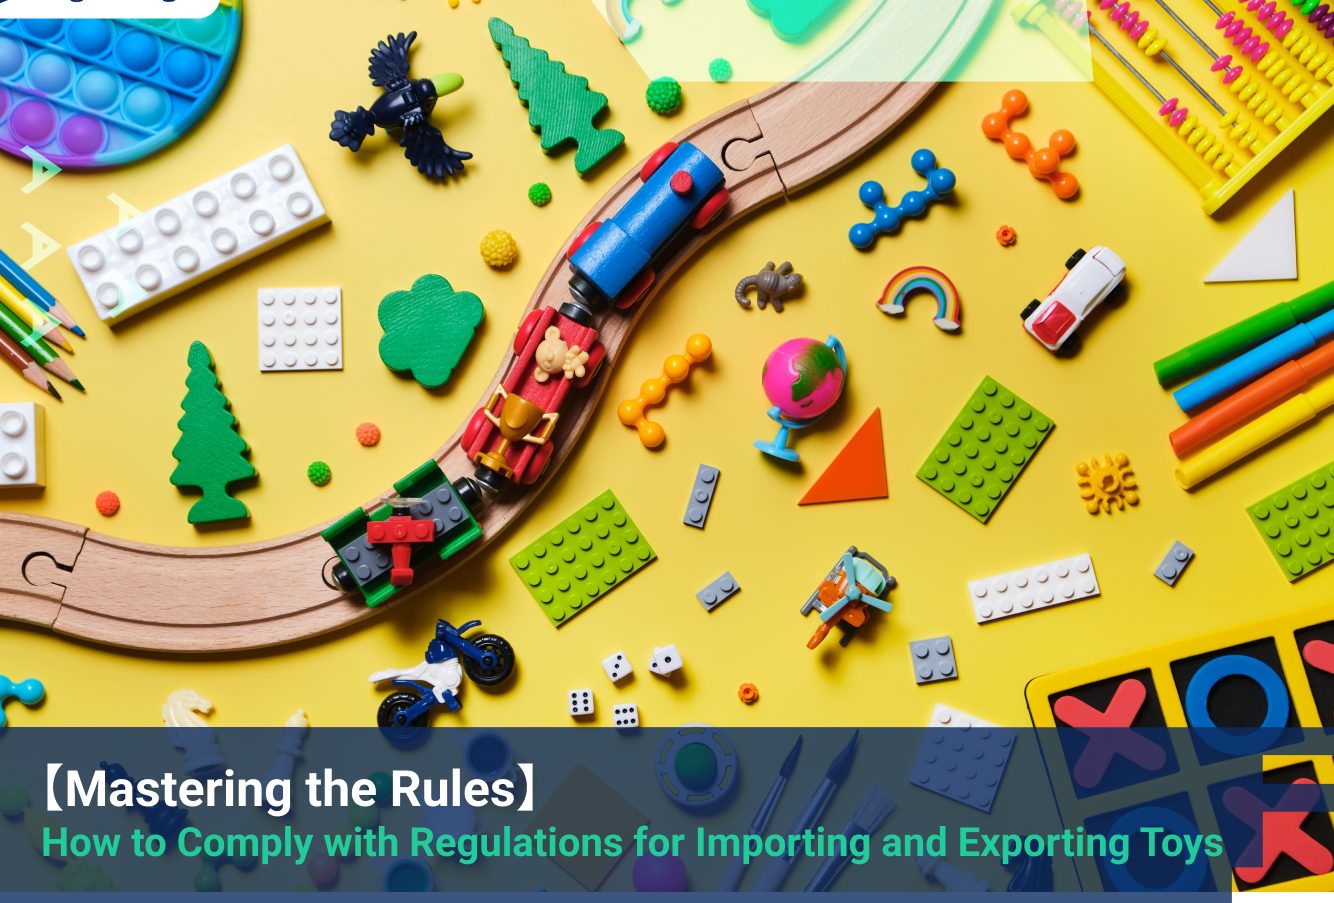 How to Comply with Regulations for Importing and Exporting Toys